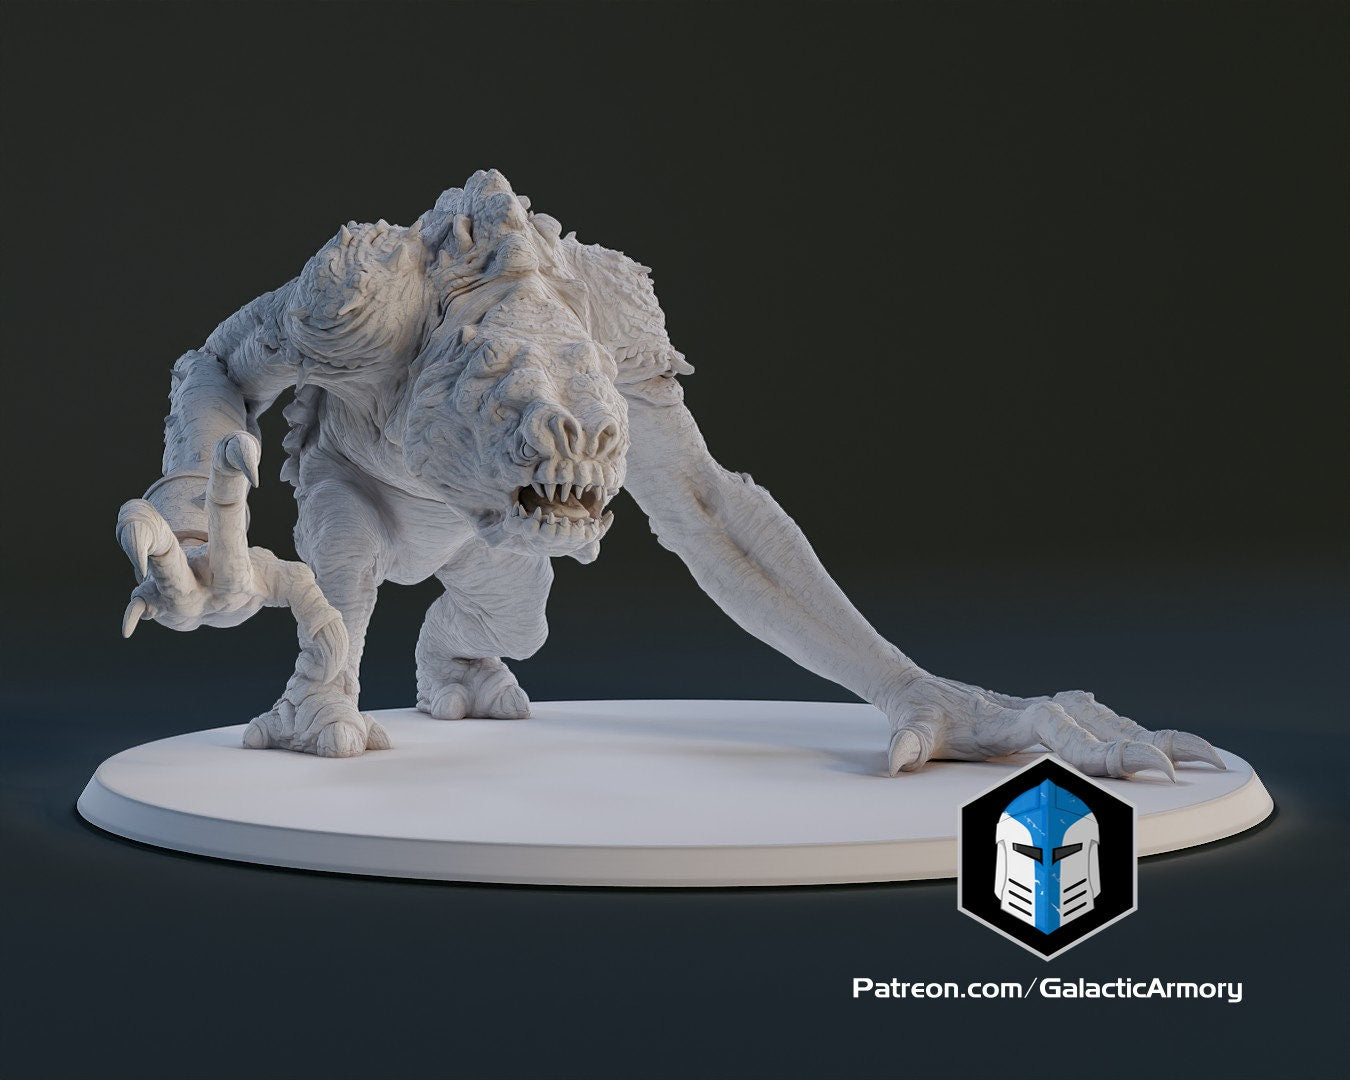 1:48 Scale Rancor (10 poses) - (Fan art by Galactic Armoury)